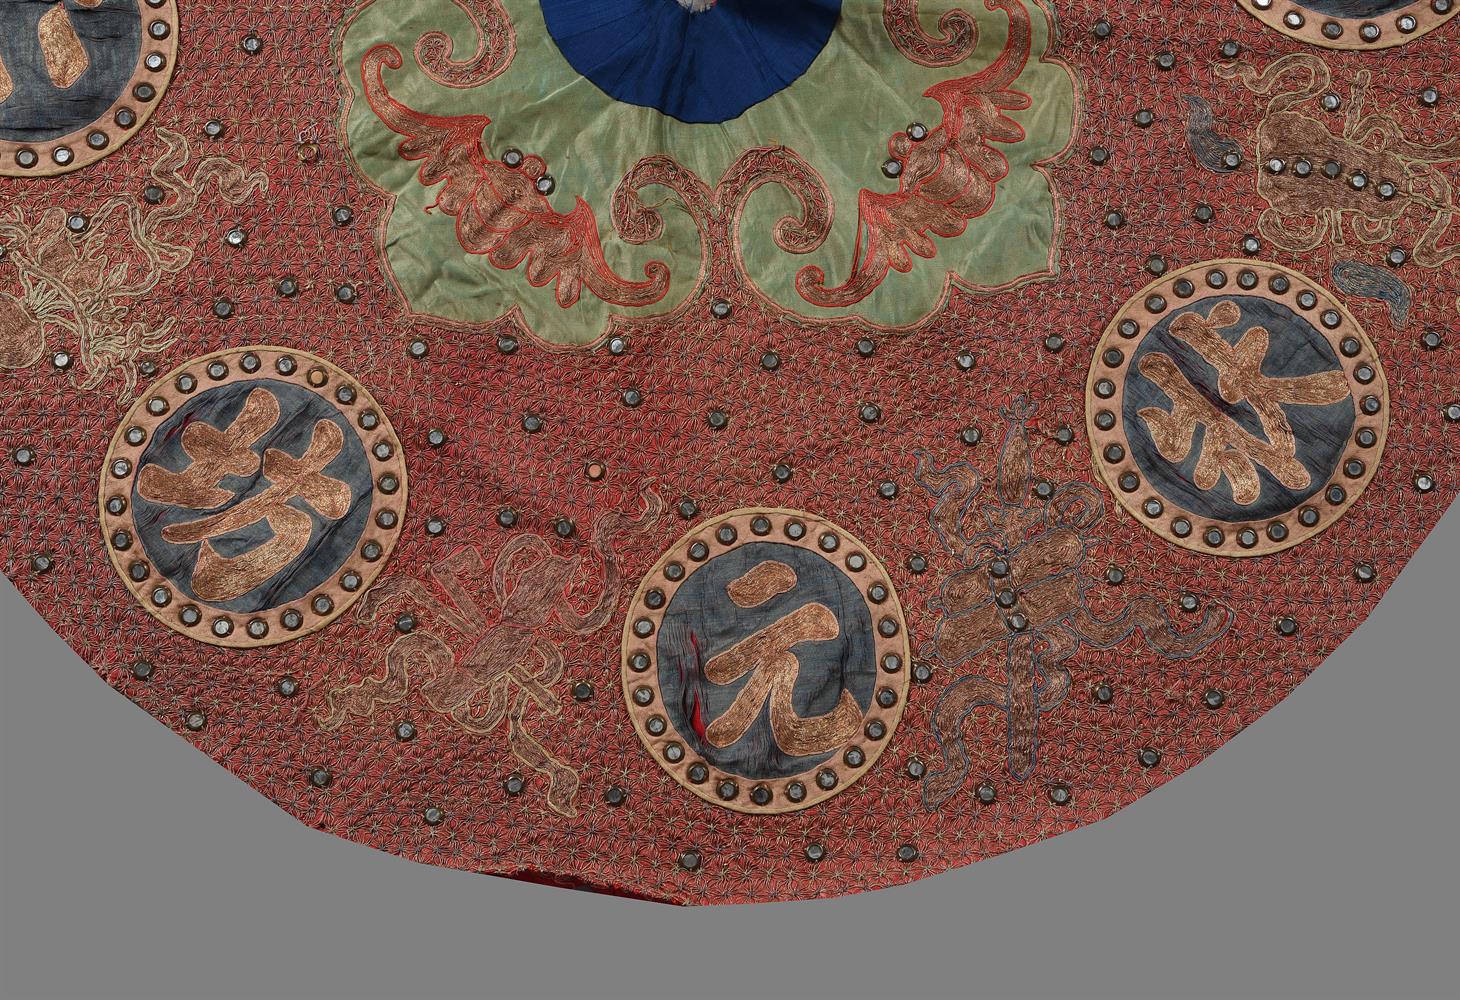 An unusual Chinese silk umbrella canopy cover - Image 2 of 2